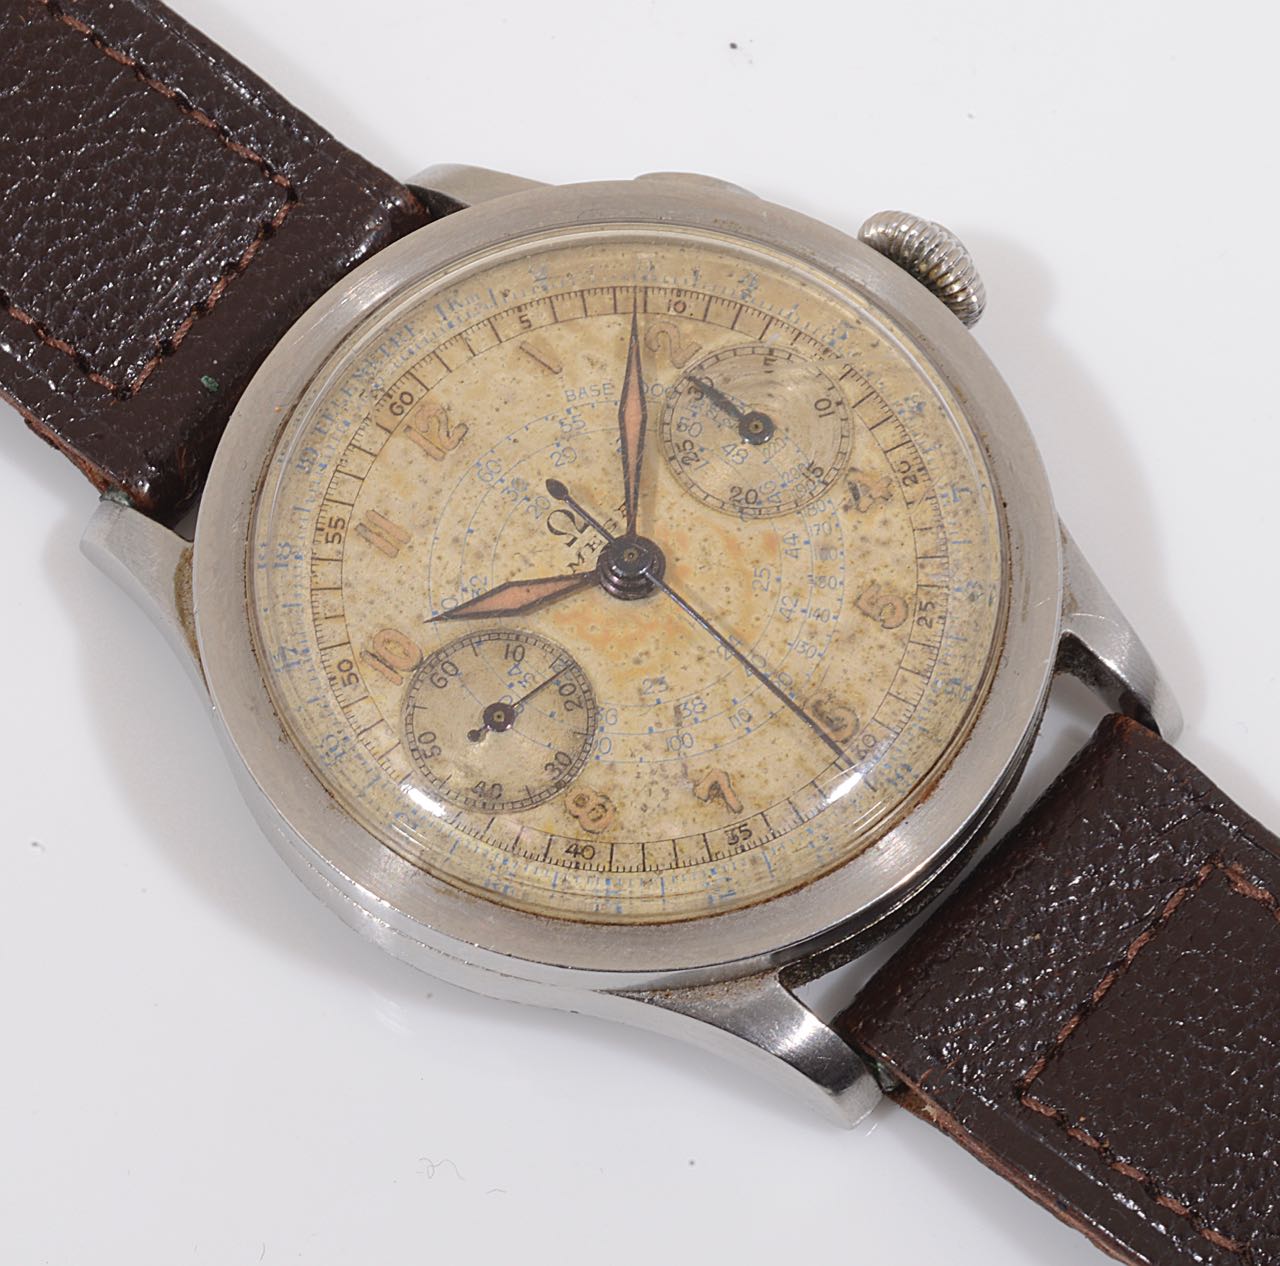 A rare gentleman's large size stainless steel Omega 33.3 monopusher chronograph wristwatch c.1939 - Image 2 of 4